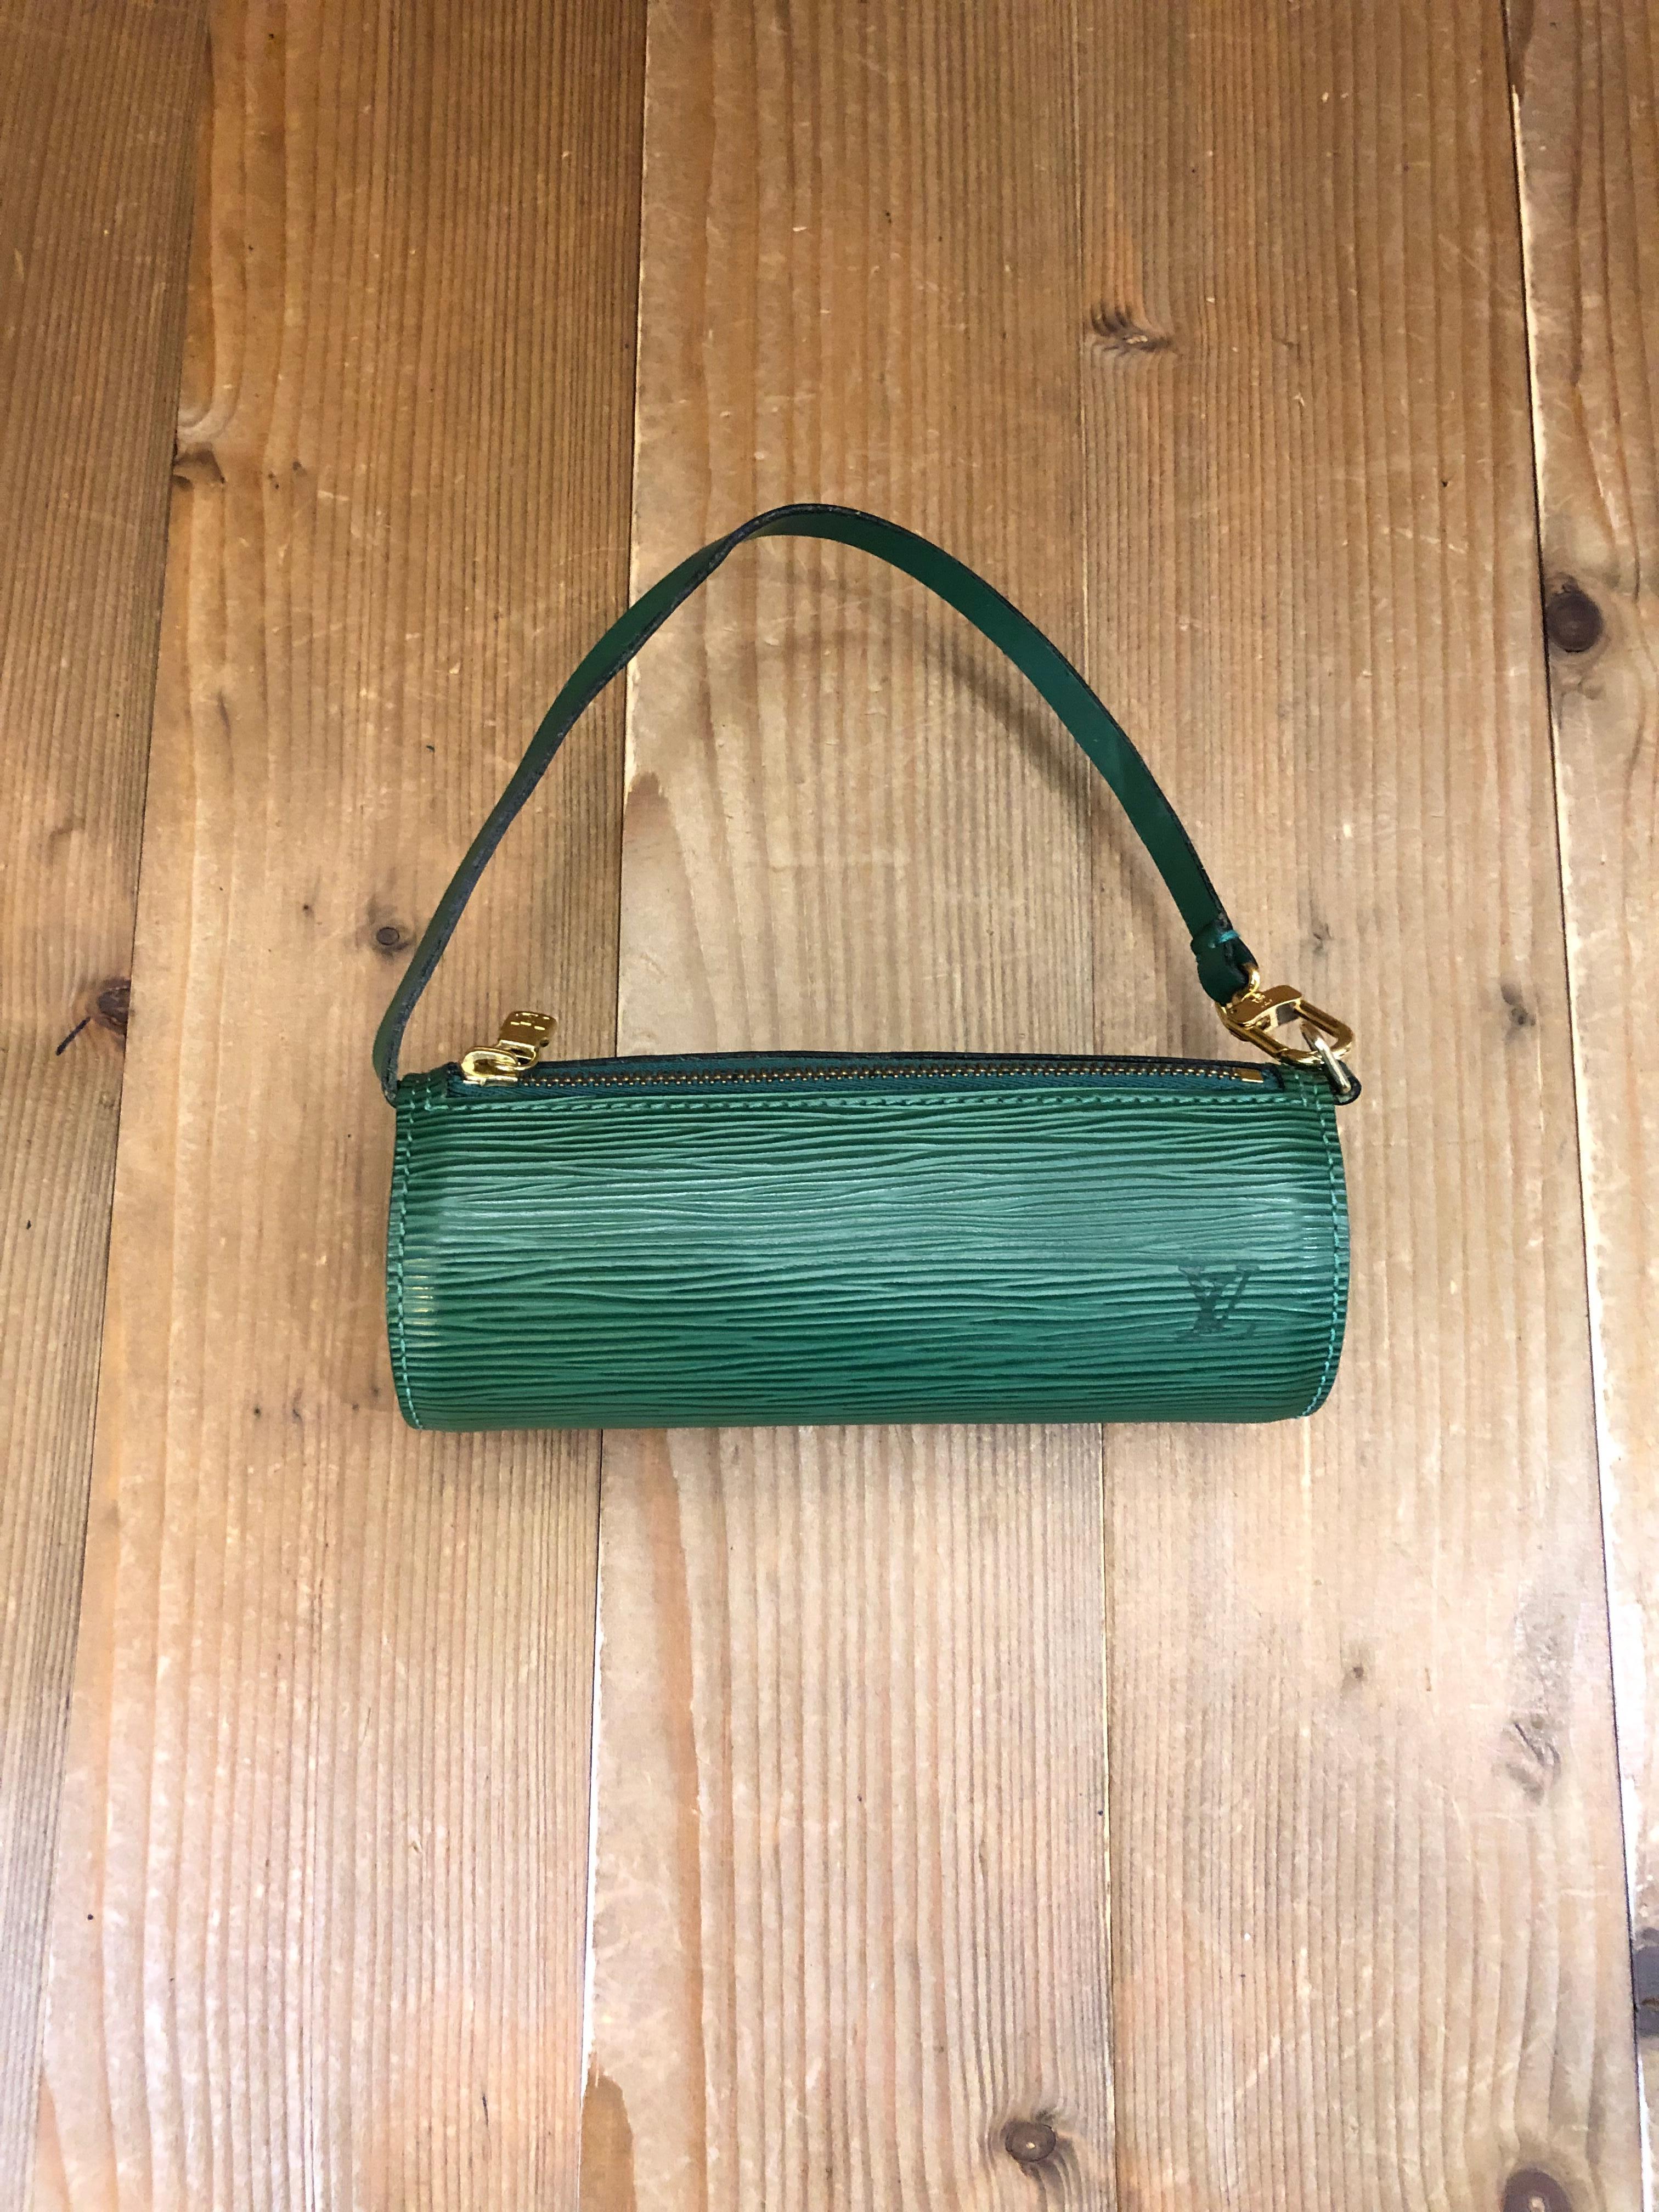 1990s LOUIS VUITTON mini Papillon pouch in green Epi leather. It originally came with the mother papillon. Rhianna was photographed carrying one. Made in France. Measures 6.25”x 2.25”x 2.25”. Comes with complimentary non-LV chain.

Condition - Minor